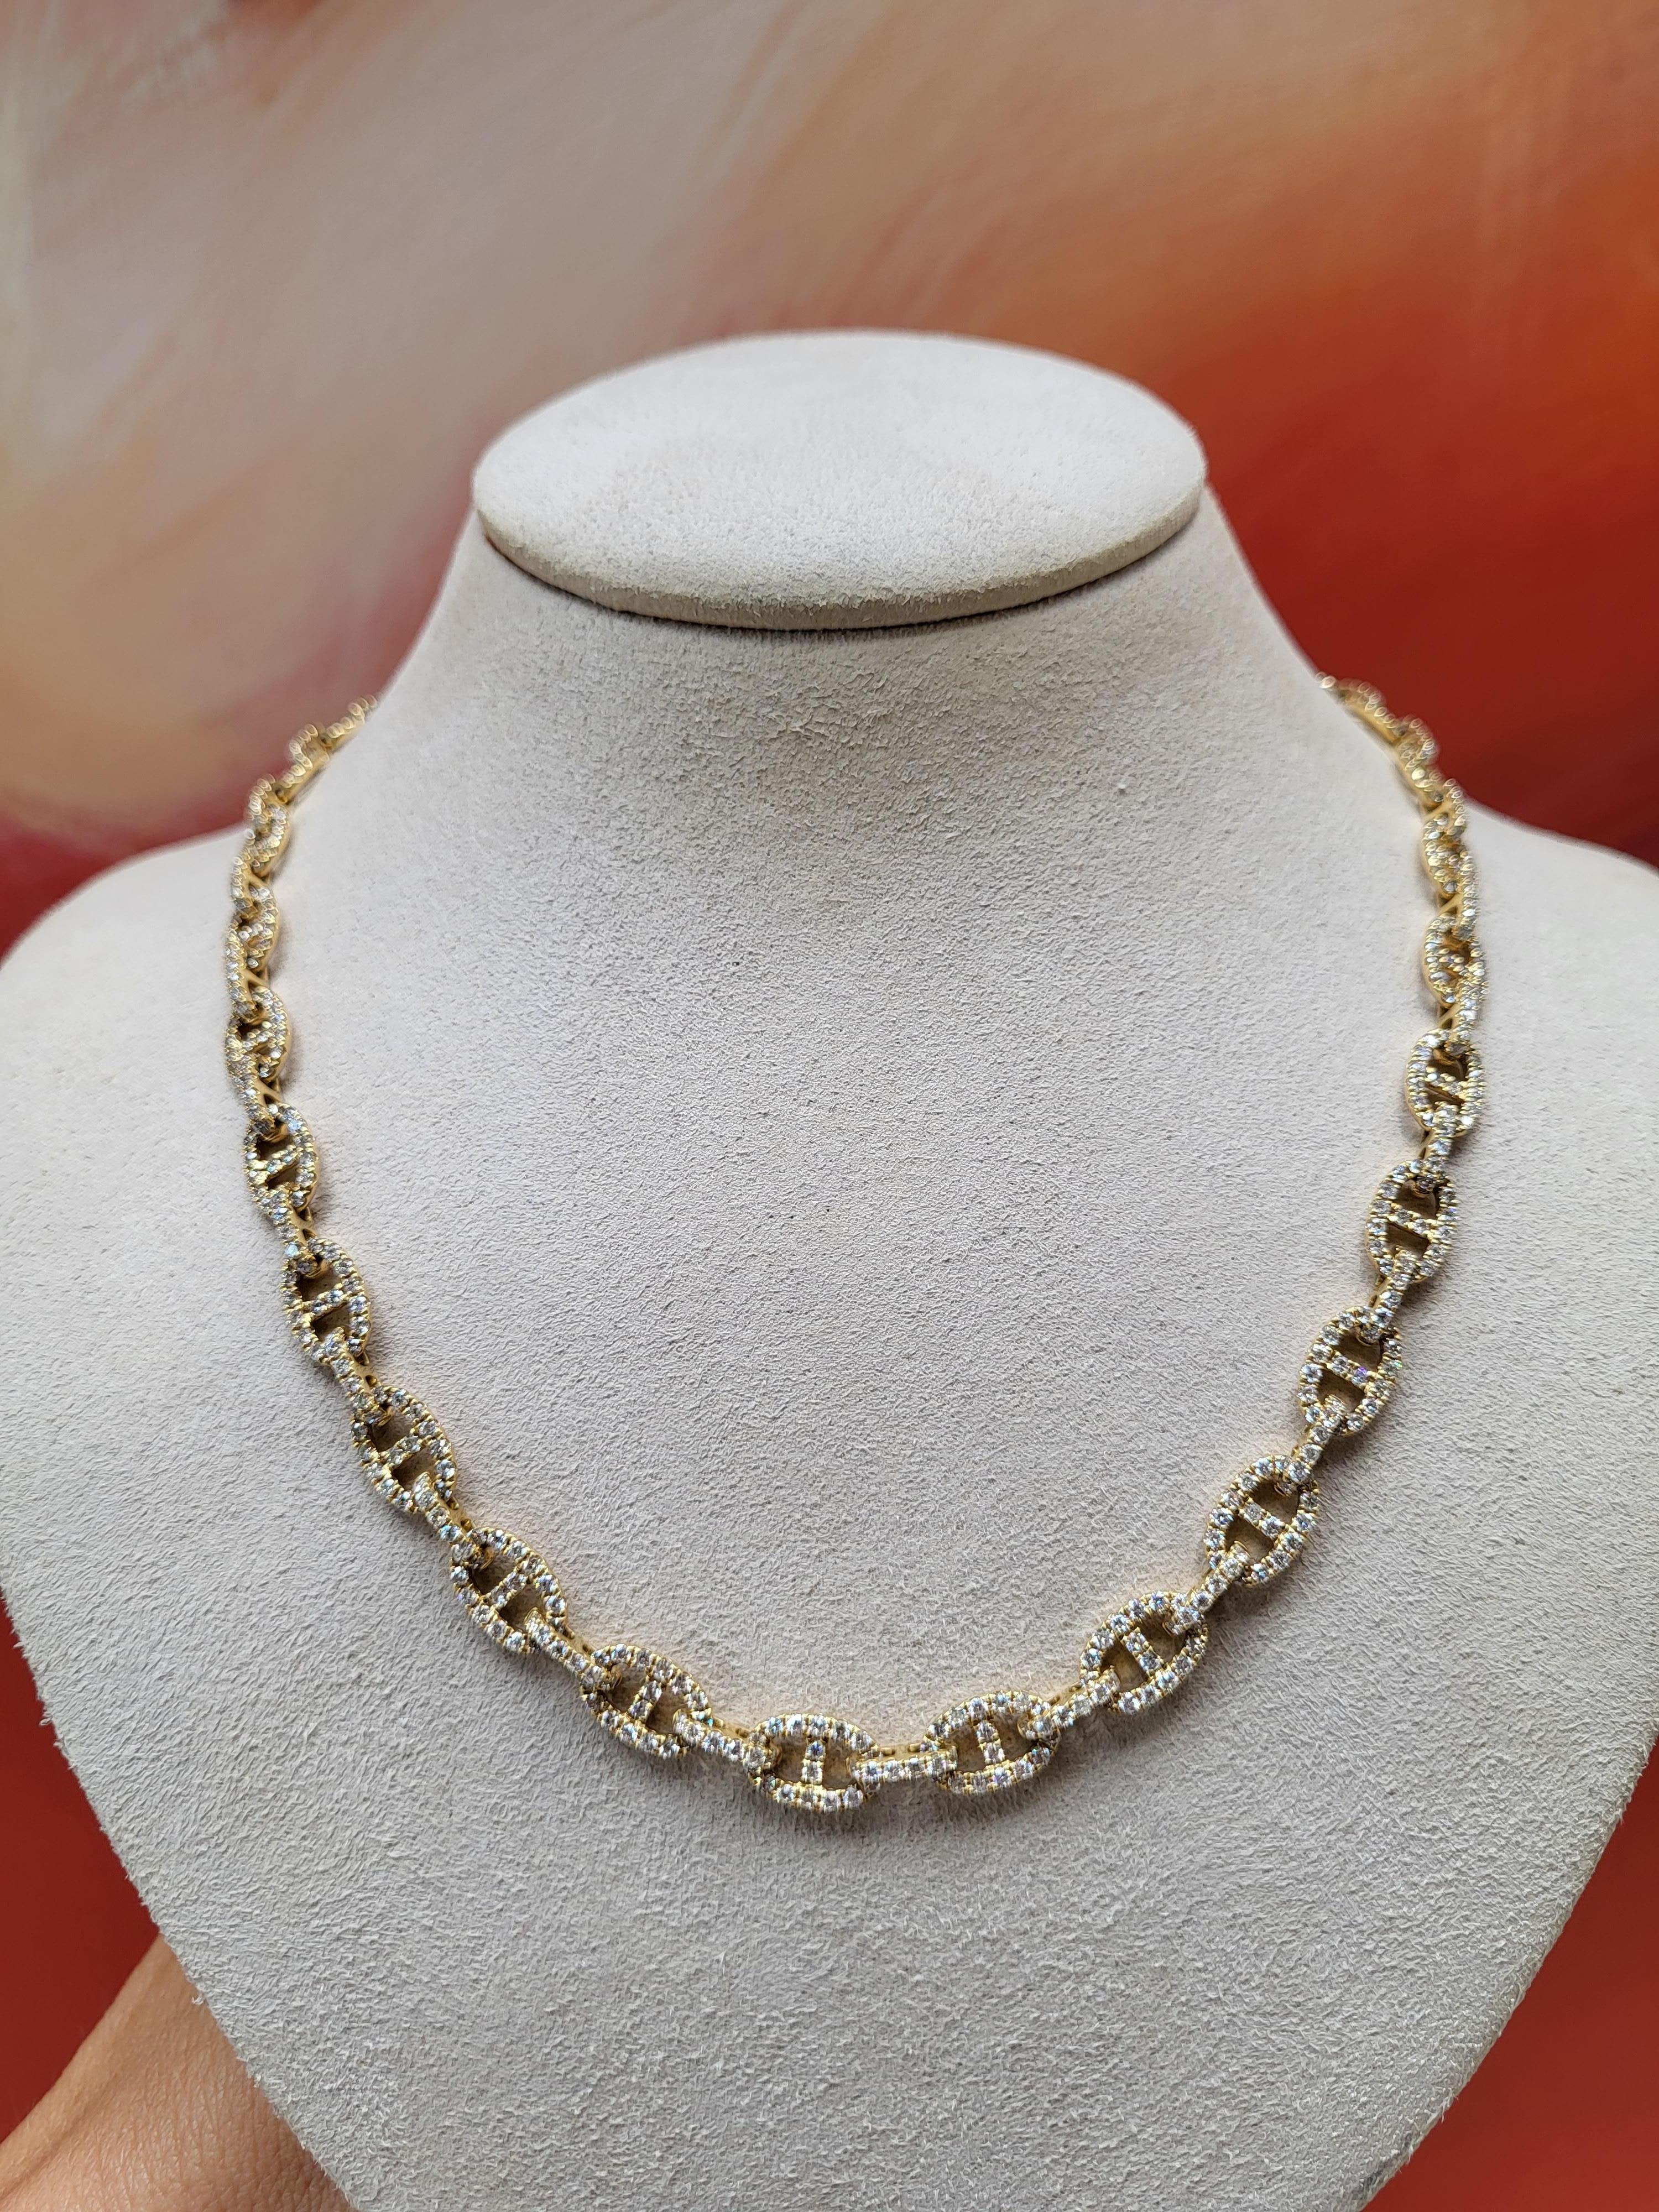 18 Karat Yellow Gold 6.22 Carat Total Weight Round Diamond Link Necklace For Sale 8